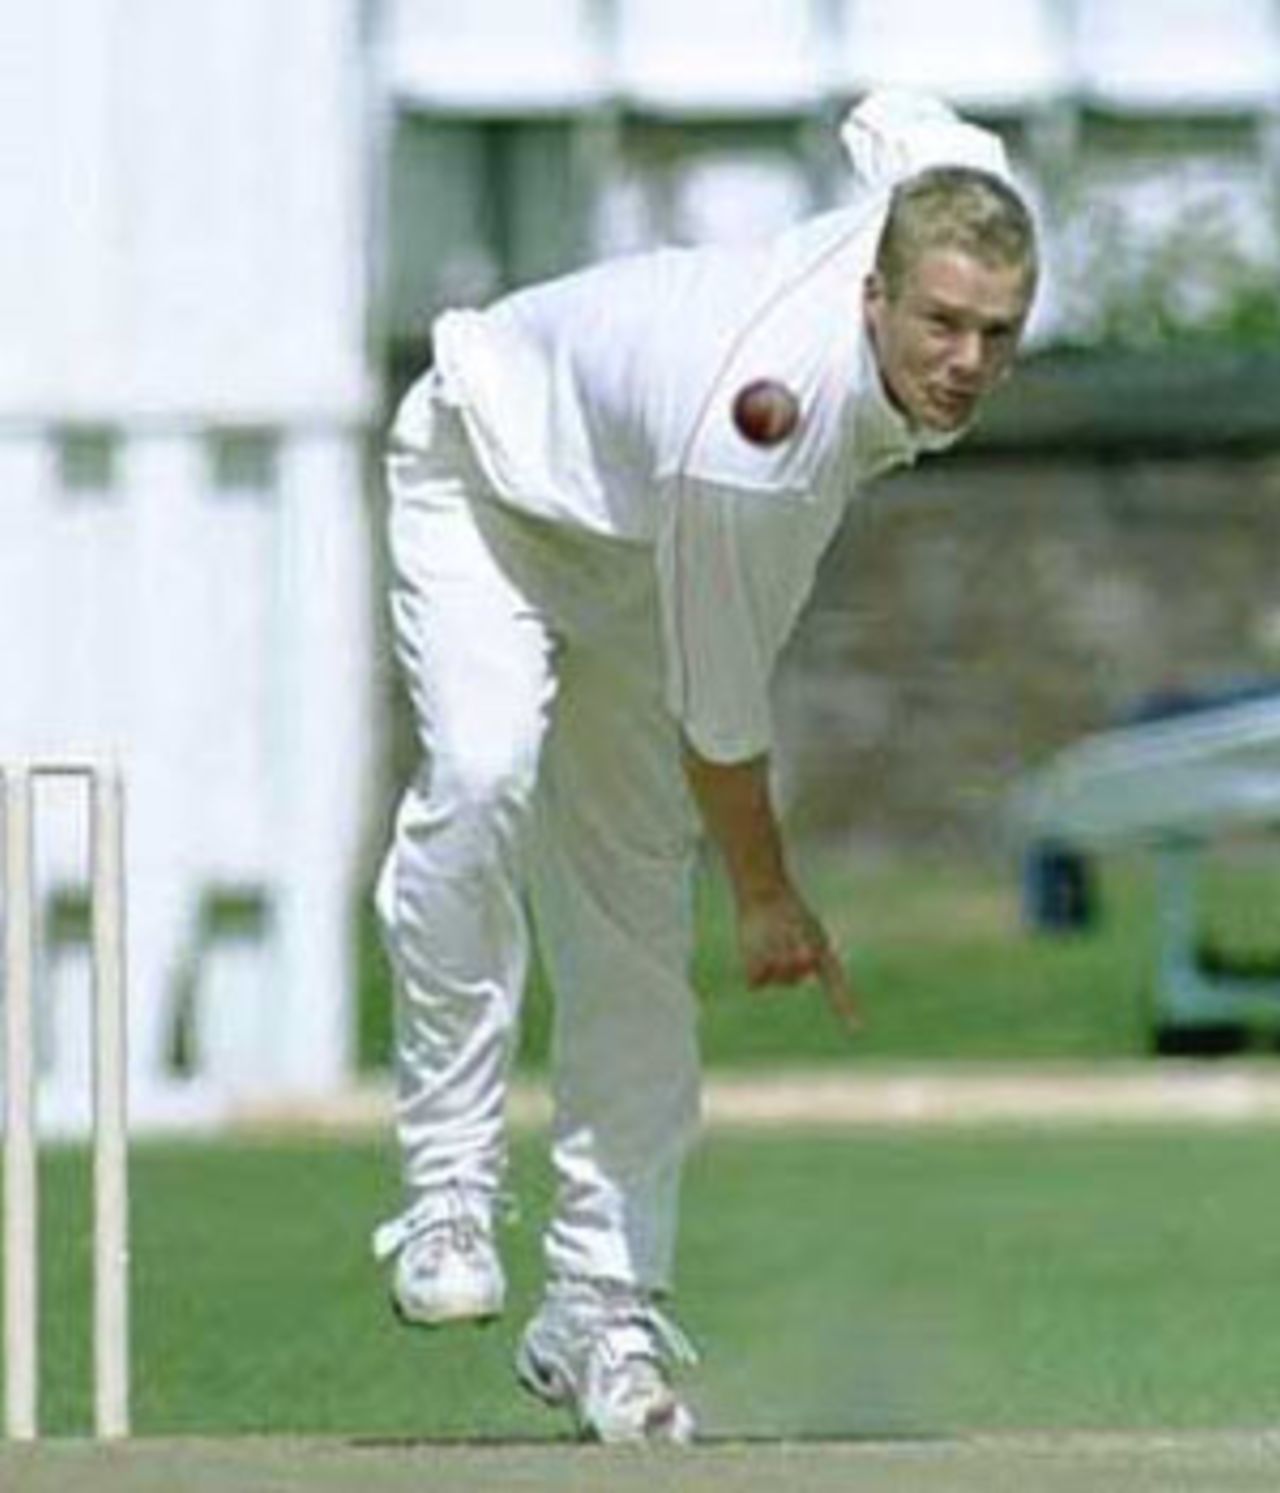 Richard Green in action against New Zealand 'A', New Zealand 'A' in England, 2000, Lancashire v New Zealand 'A', Aigburth, Liverpool, 13-16 June 2000(Day 3).